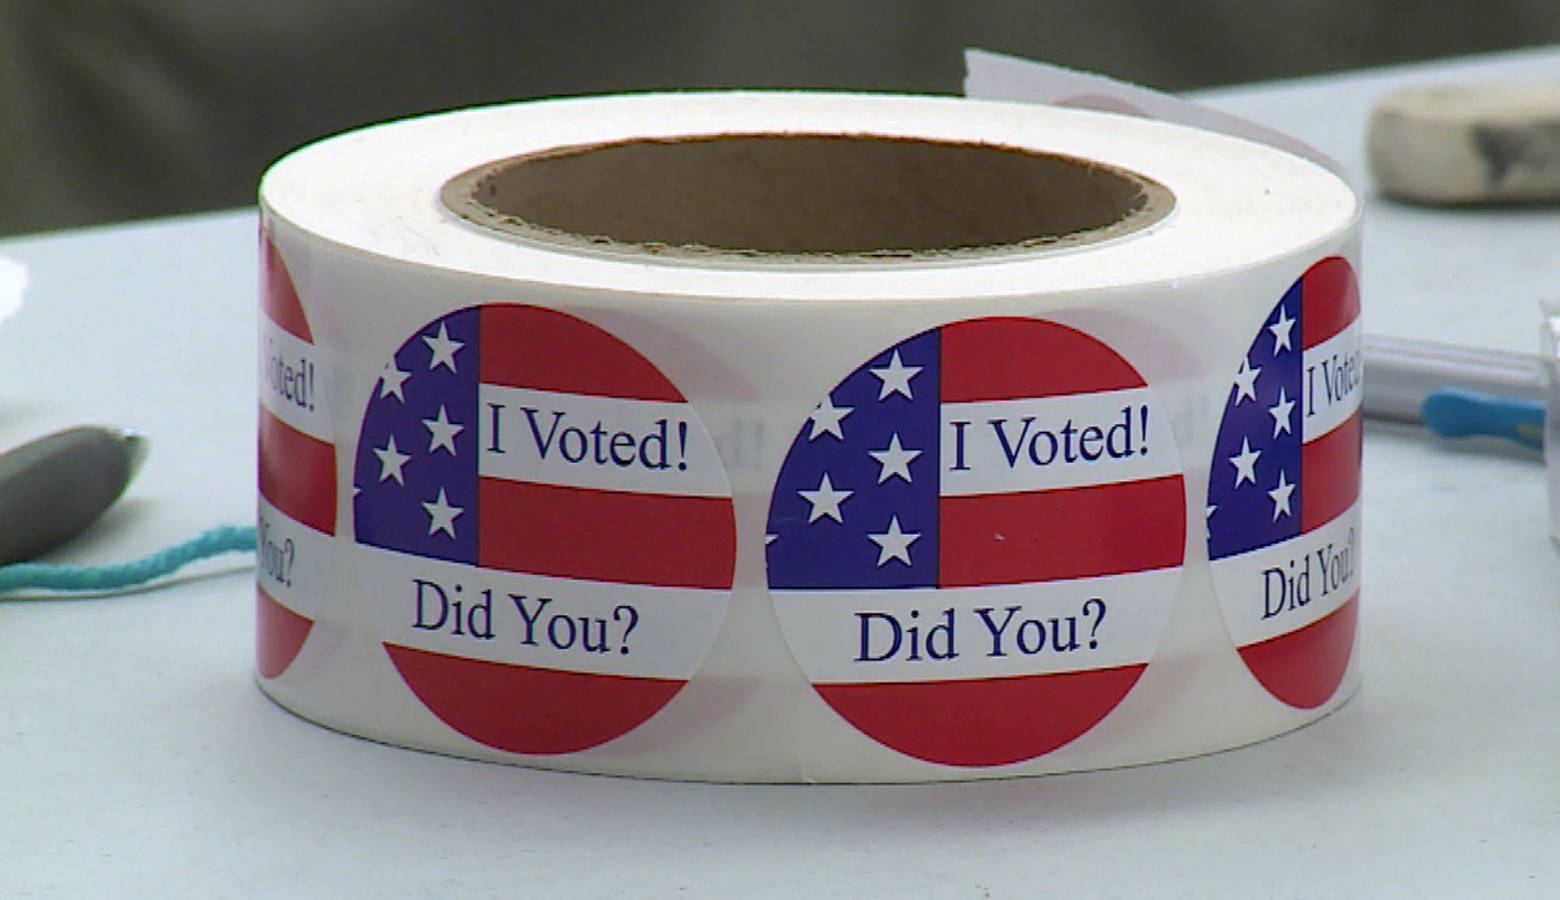 Only 13 percent of eligible, registered Hoosier voters could get stickers like these in the May 2019 primary elections. (Steve Burns/WTIU)